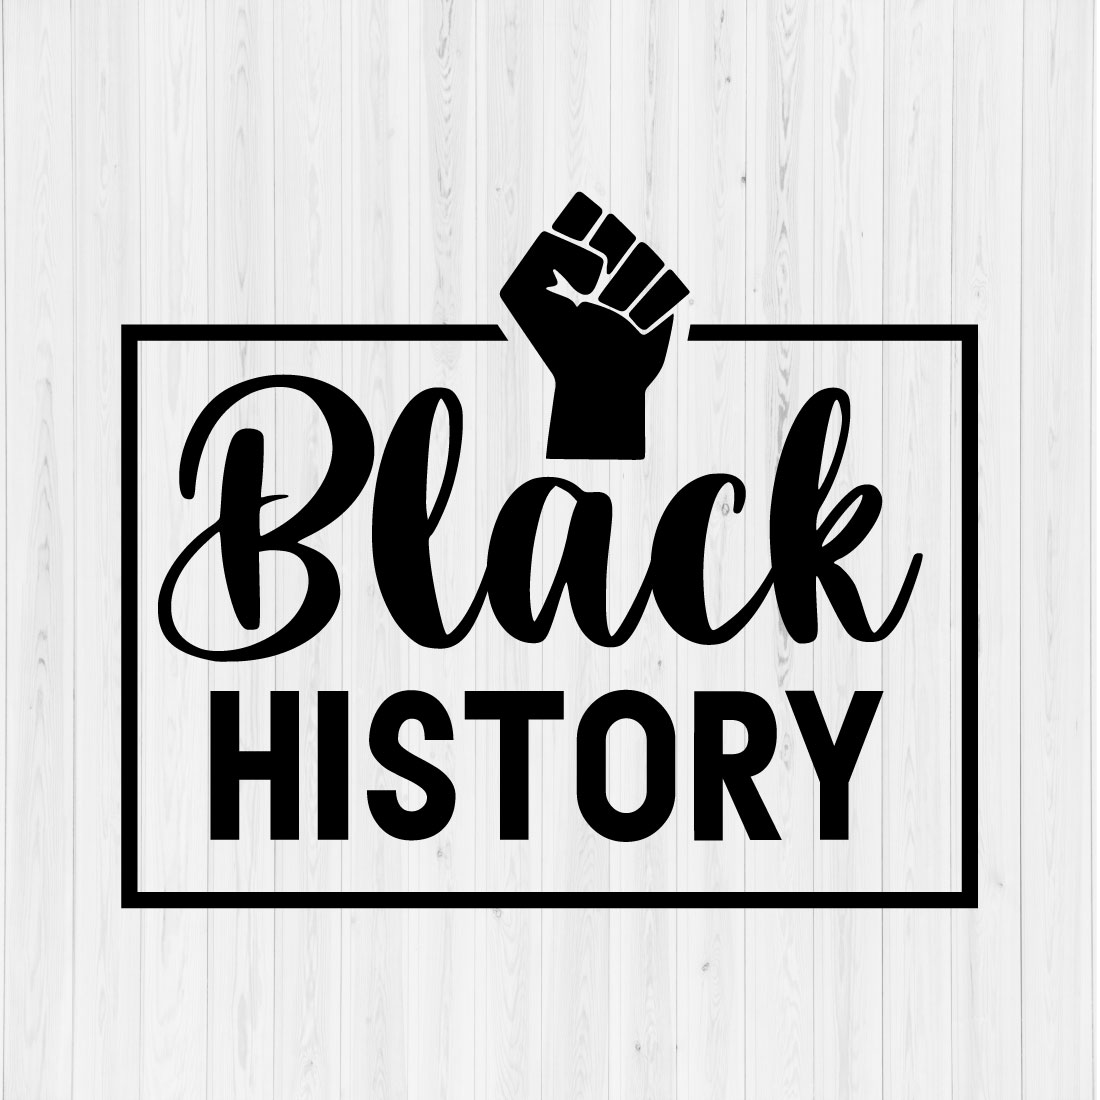 Black History preview image.